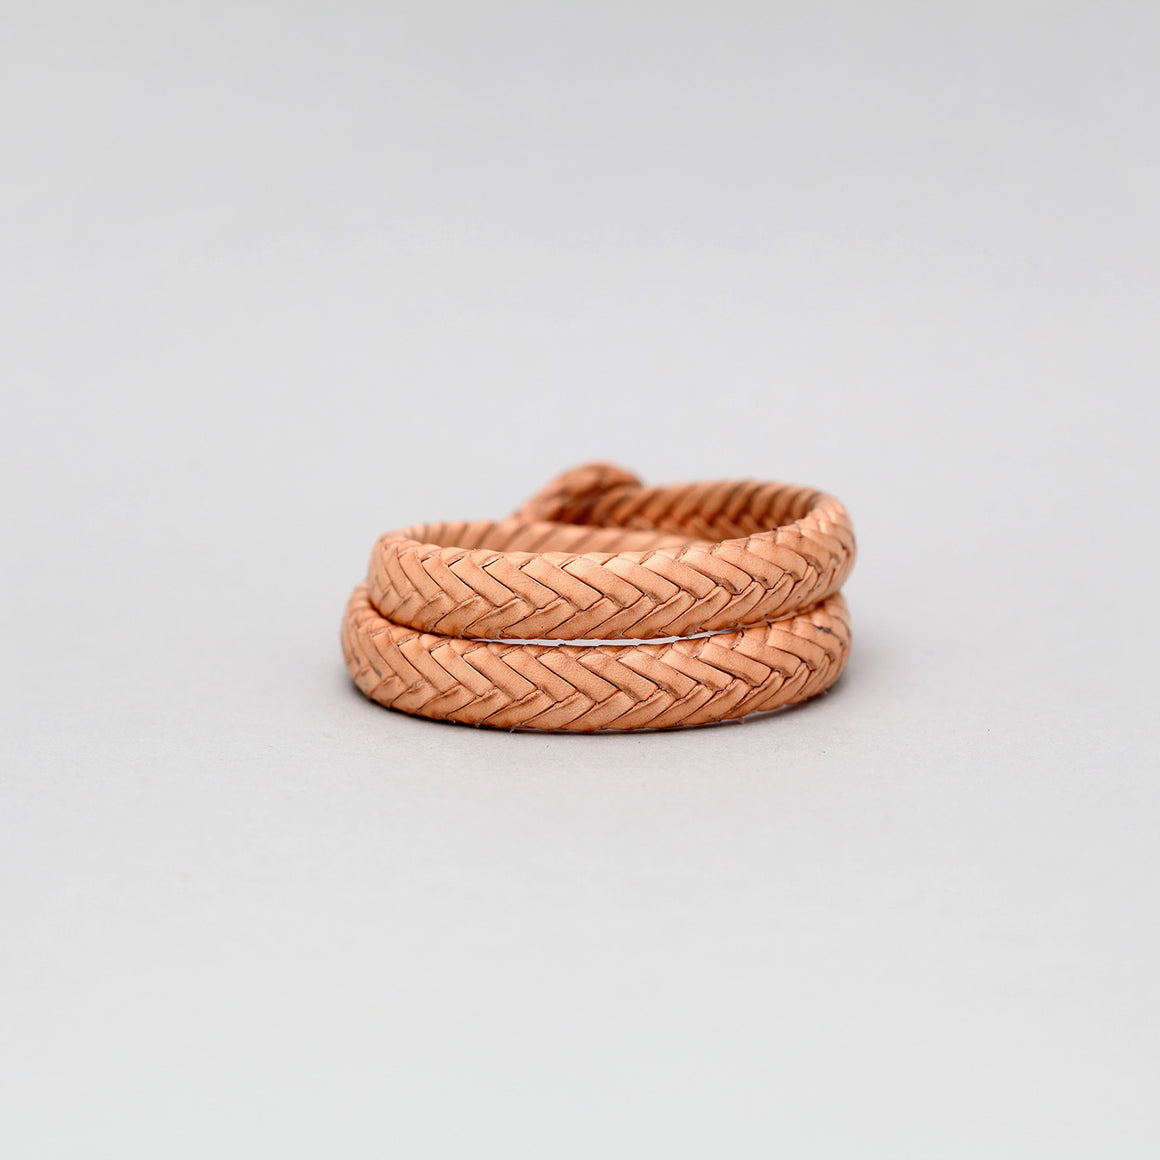 DOUBLE WRAP BRAIDED LEATHER BRACELET IN NATURAL